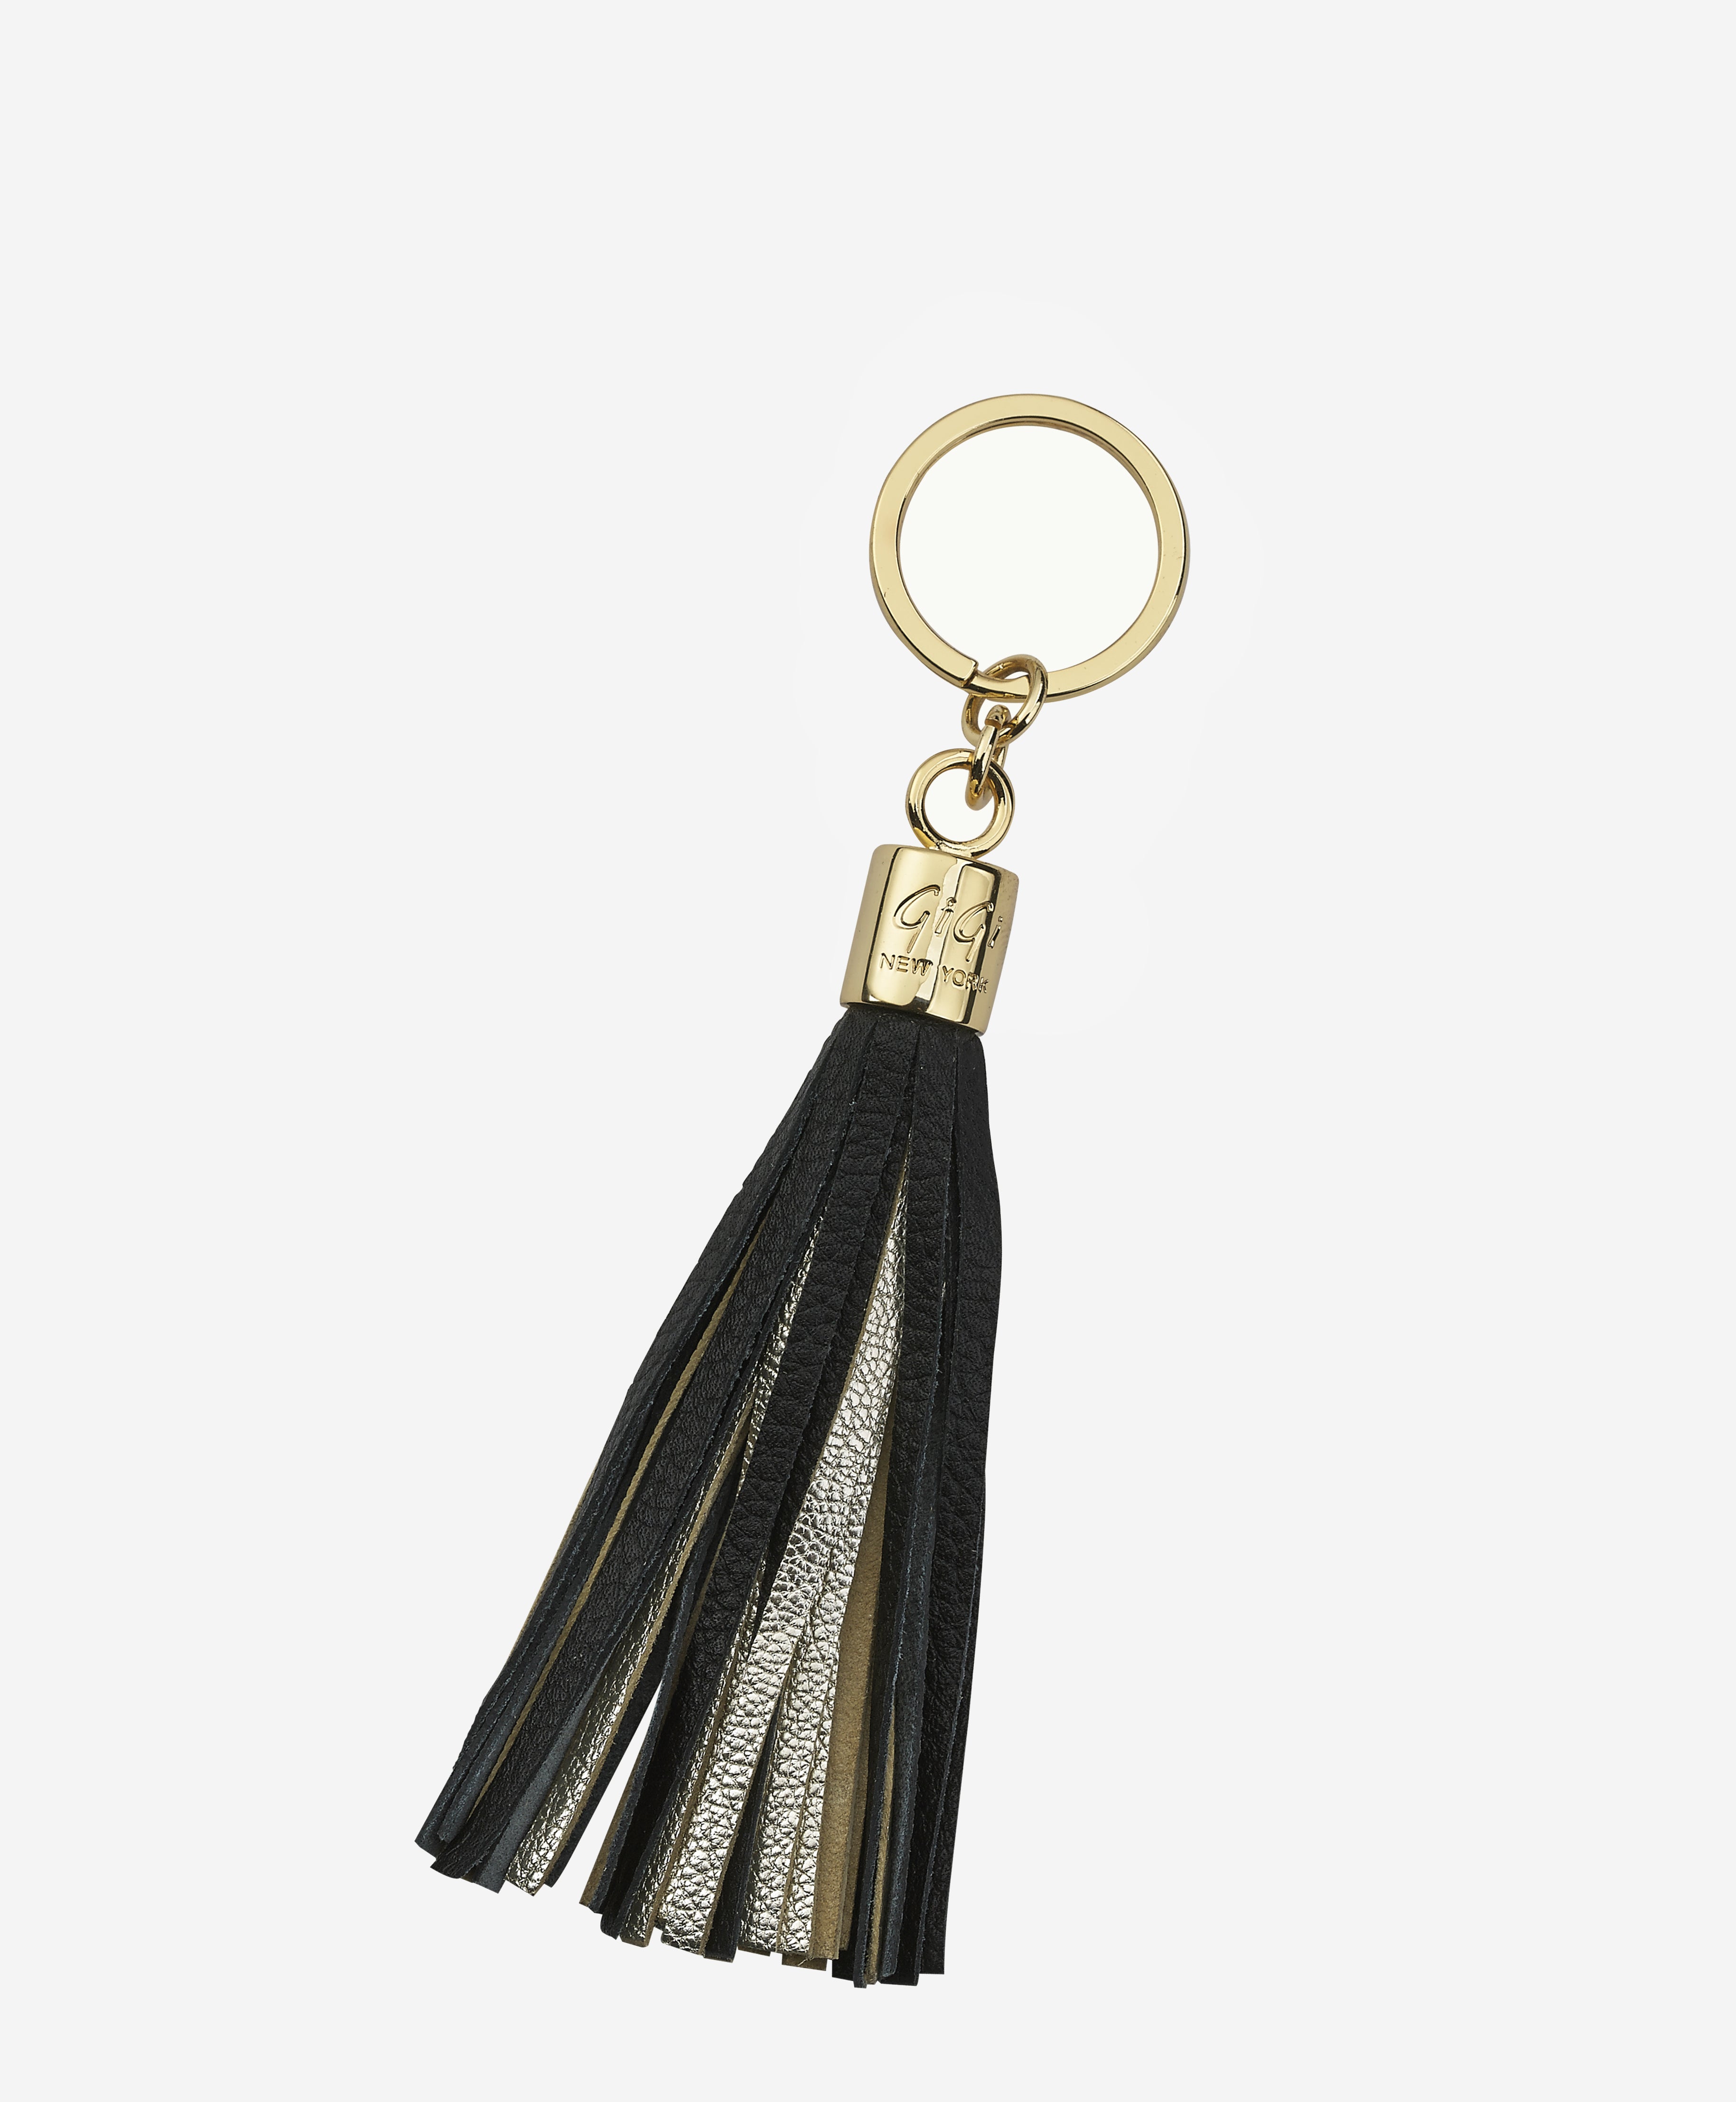 Leather Tassel Key Chain | Black and Gold Leather